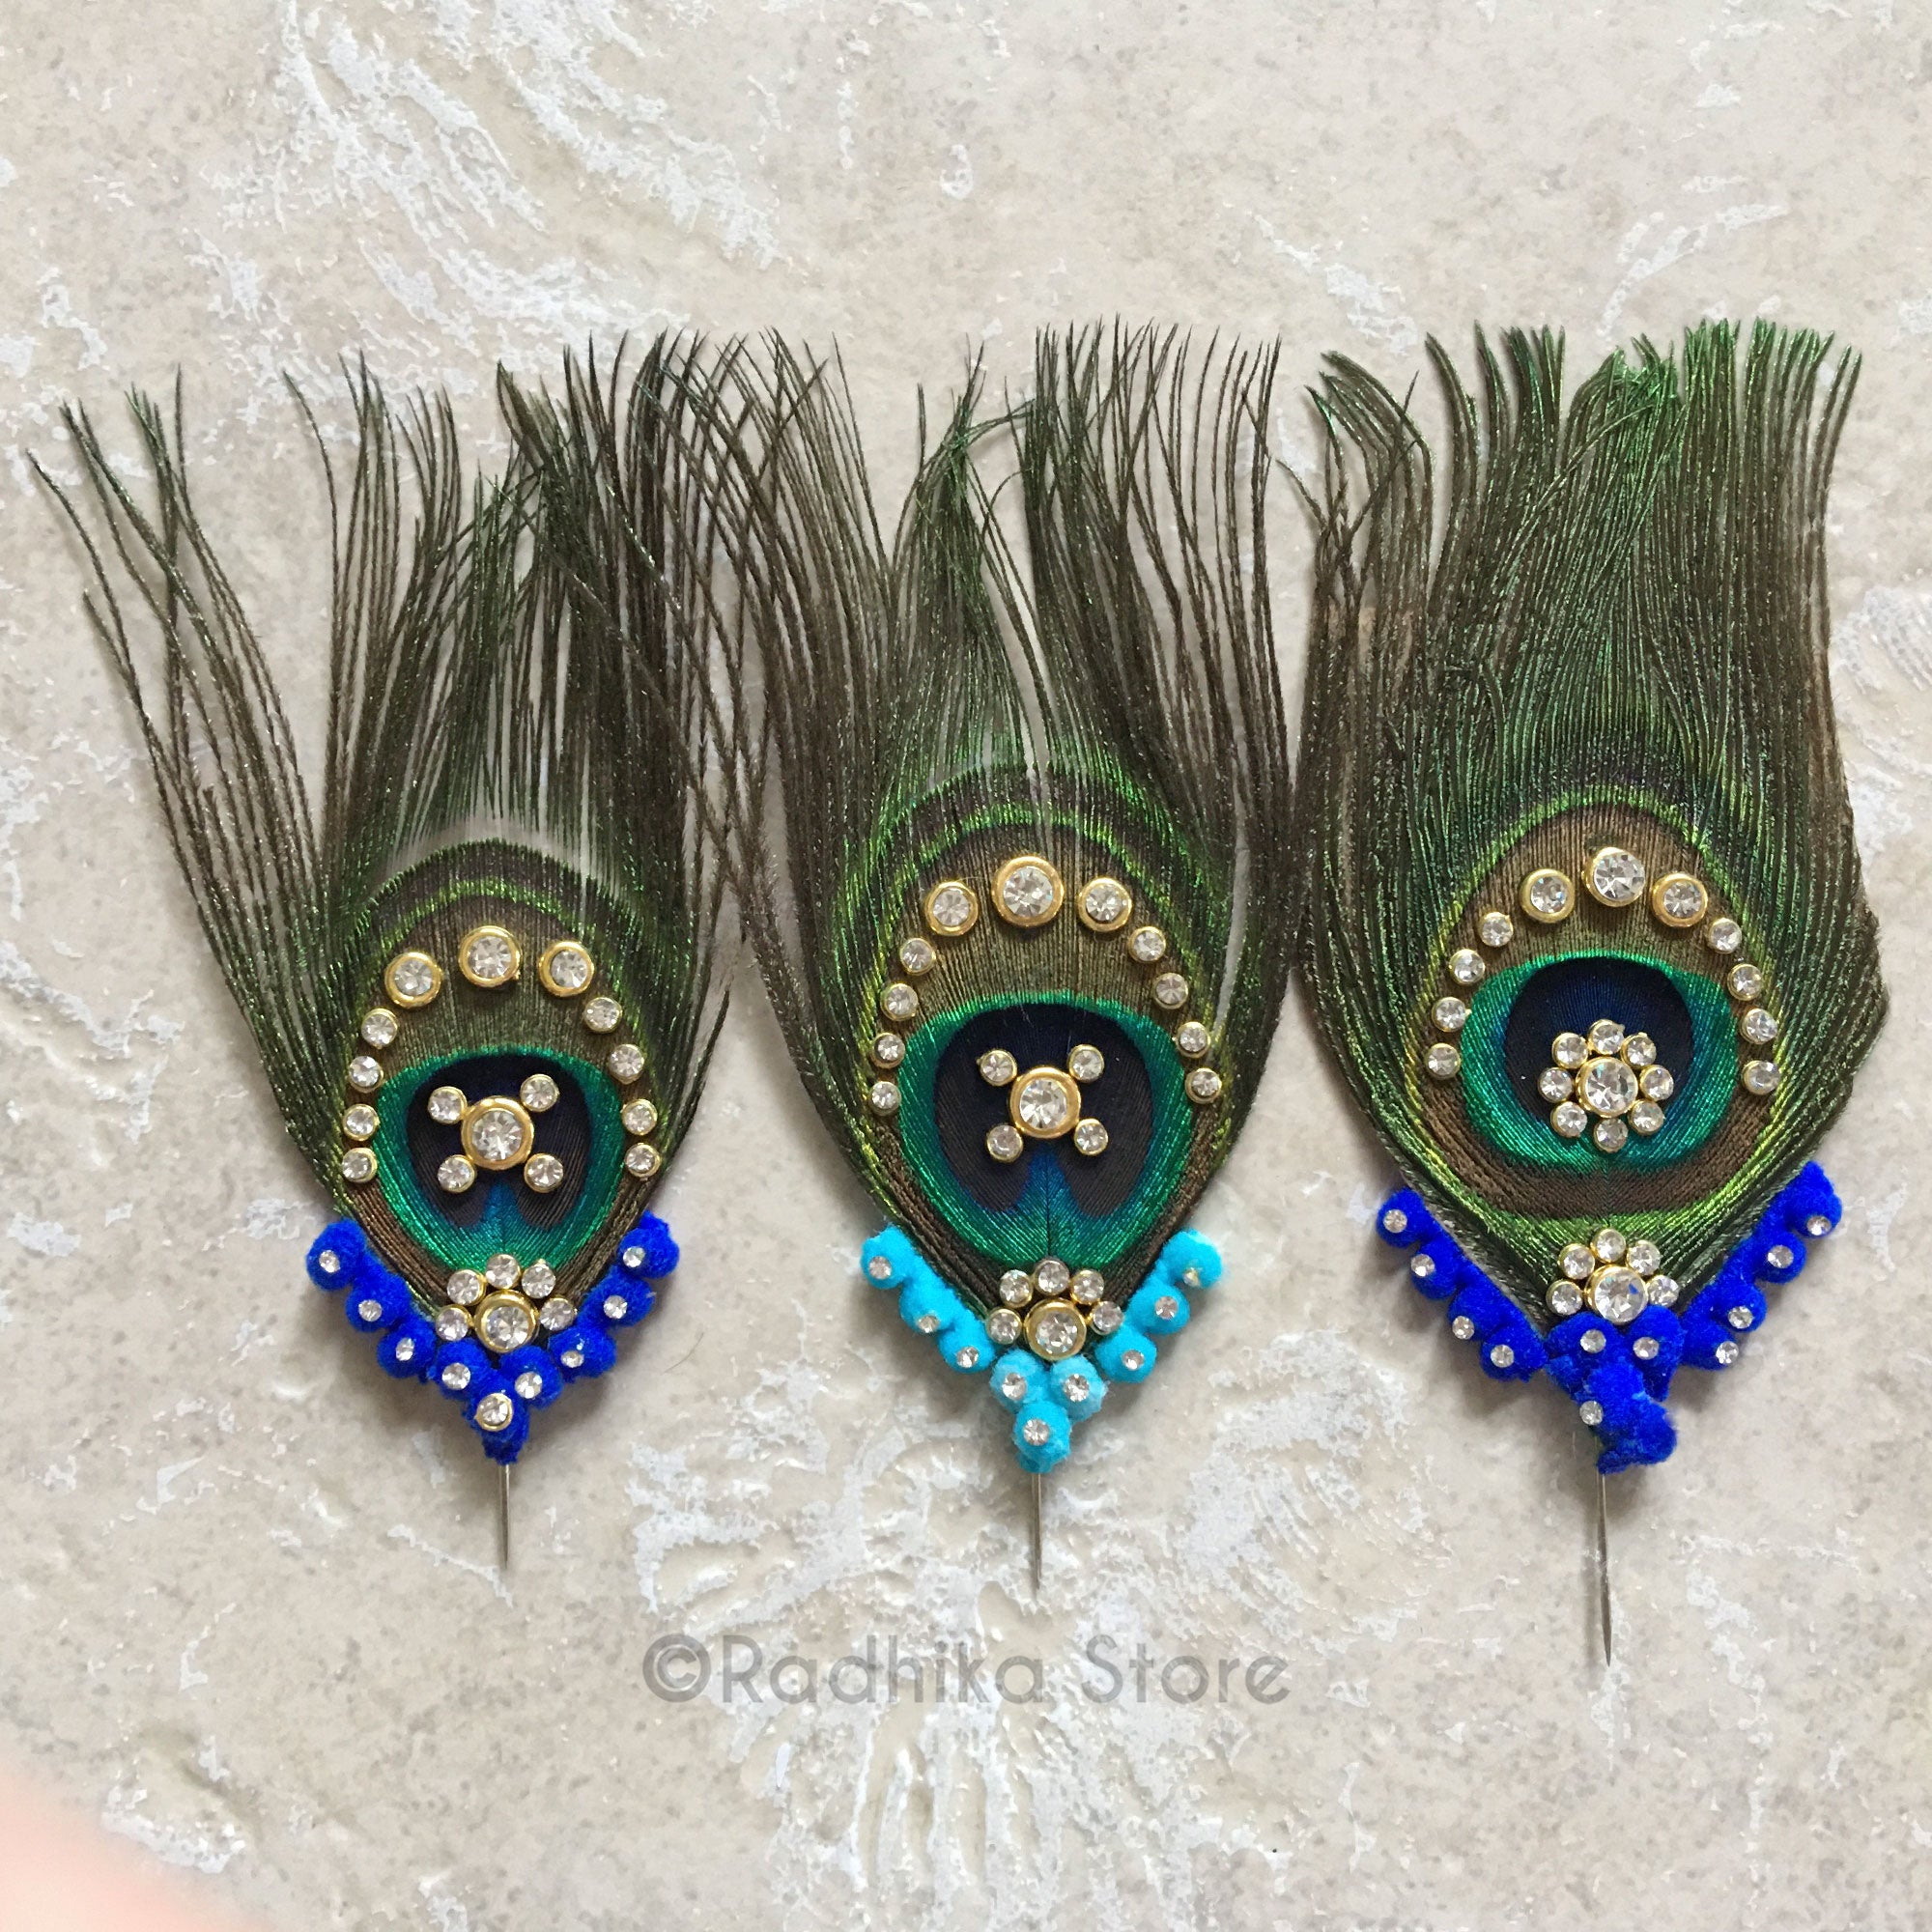 Extra Large Crystal Peacock Feathers - Peacockl Blue Colors